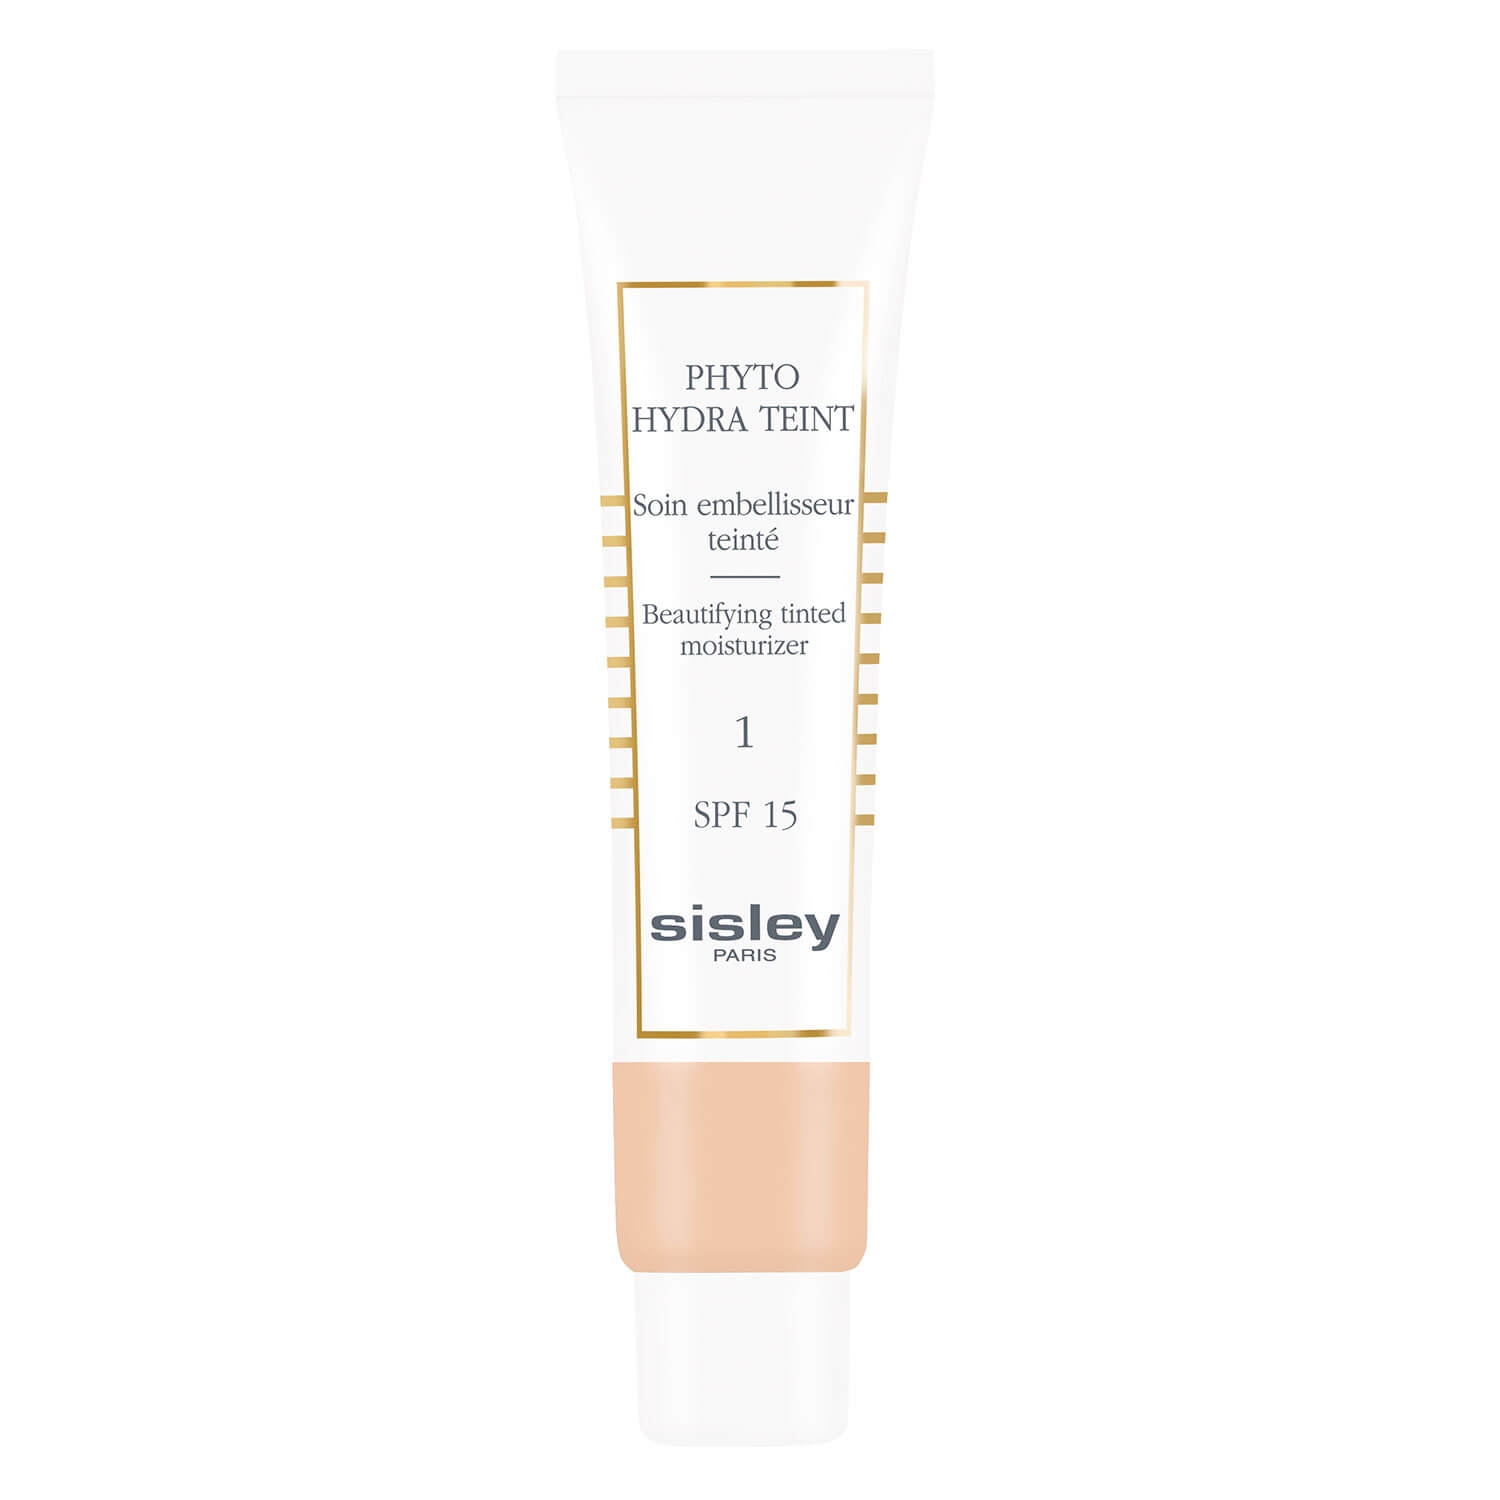 Product image from Phyto Hydra Teint - Soin Embelisseur Teinté Light 1 SPF 15